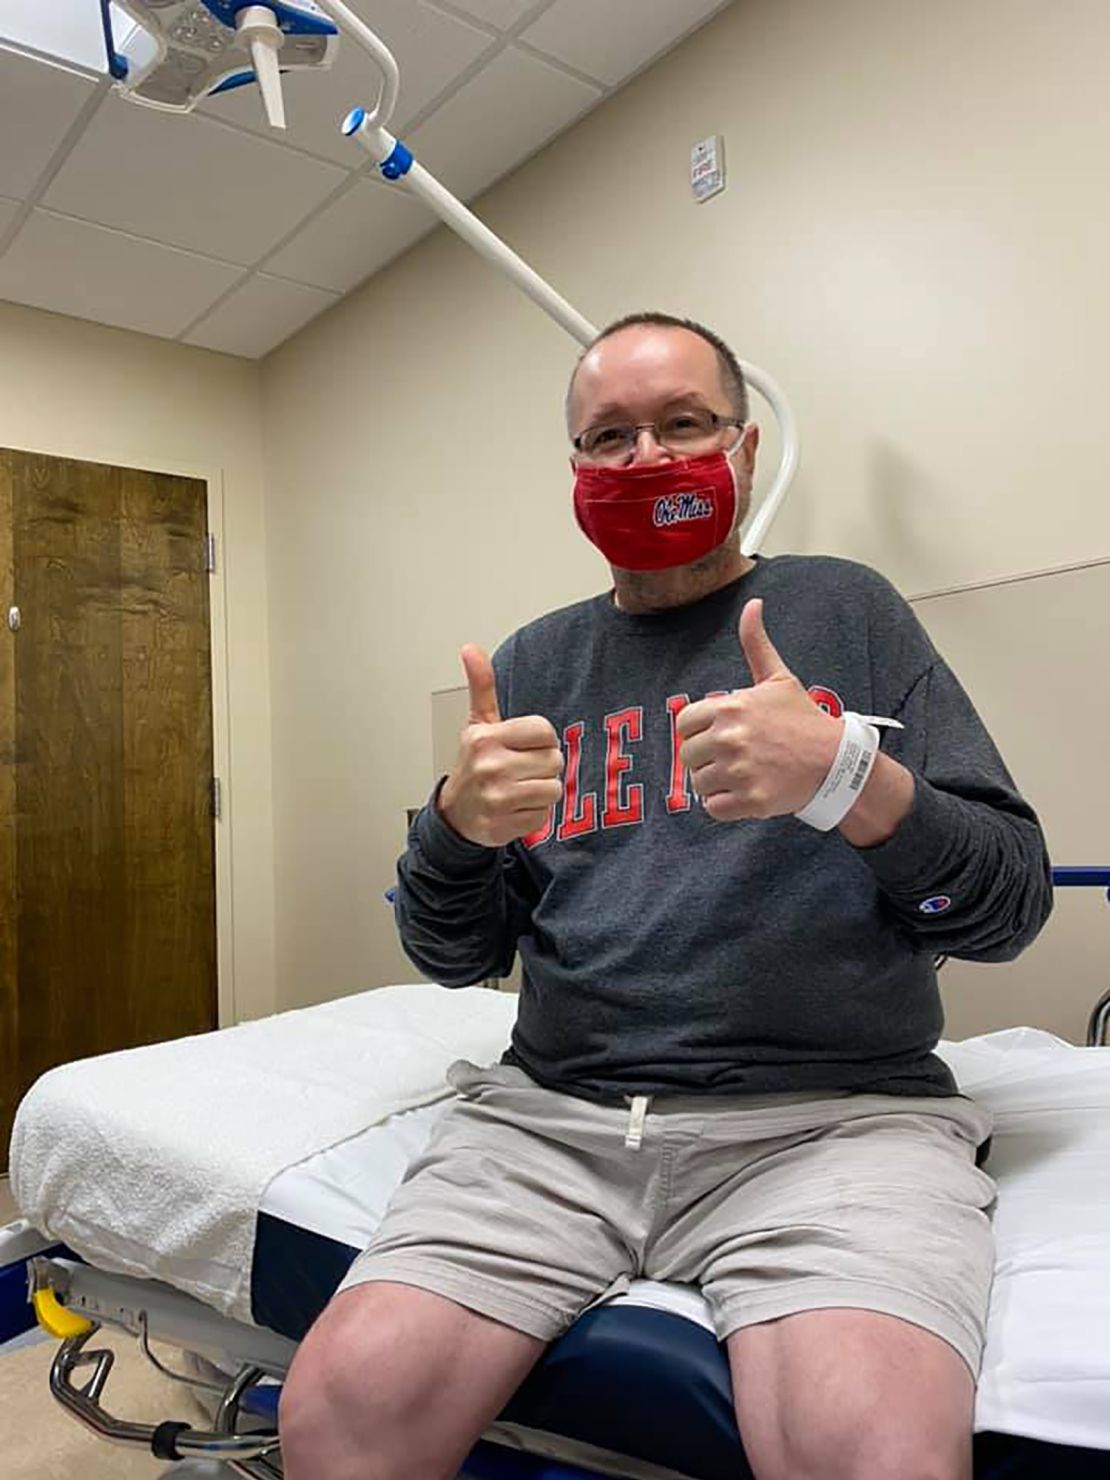 David Johnson after a visit to therapy following a 46-day hospitalization for COVID-19.